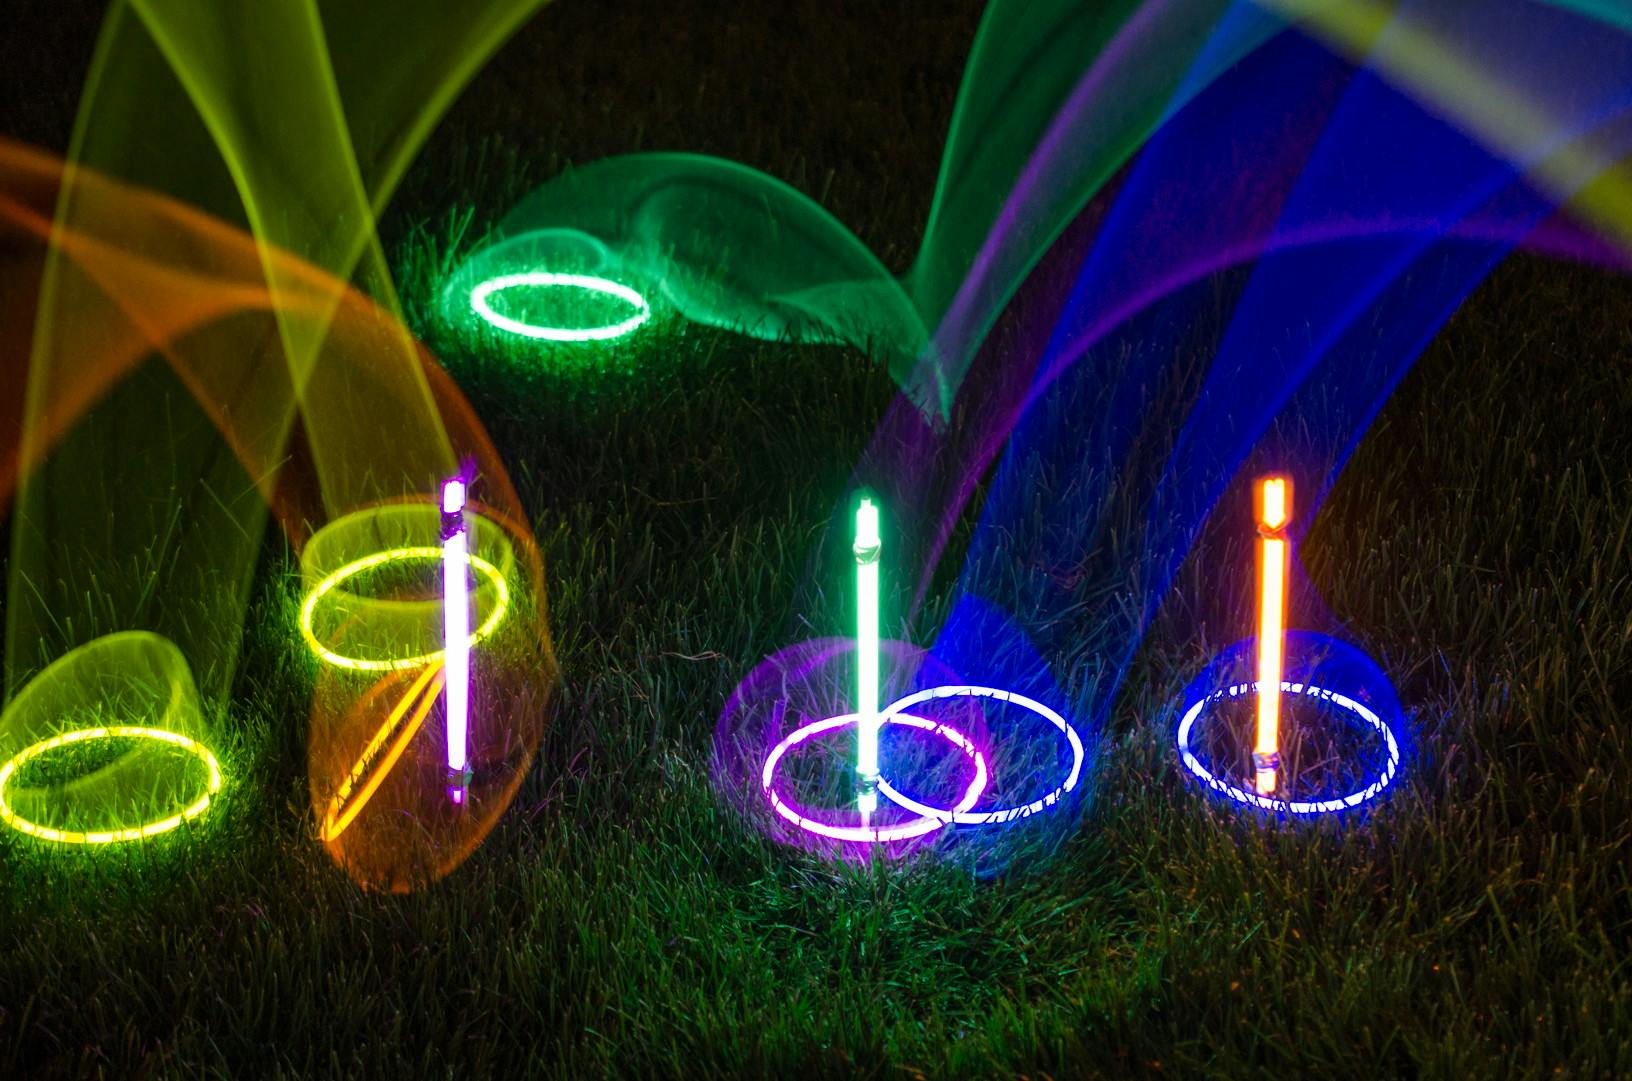 Glow stick necklaces being used in a ring toss game at night, with glow sticks sticking out of the ground as targets.